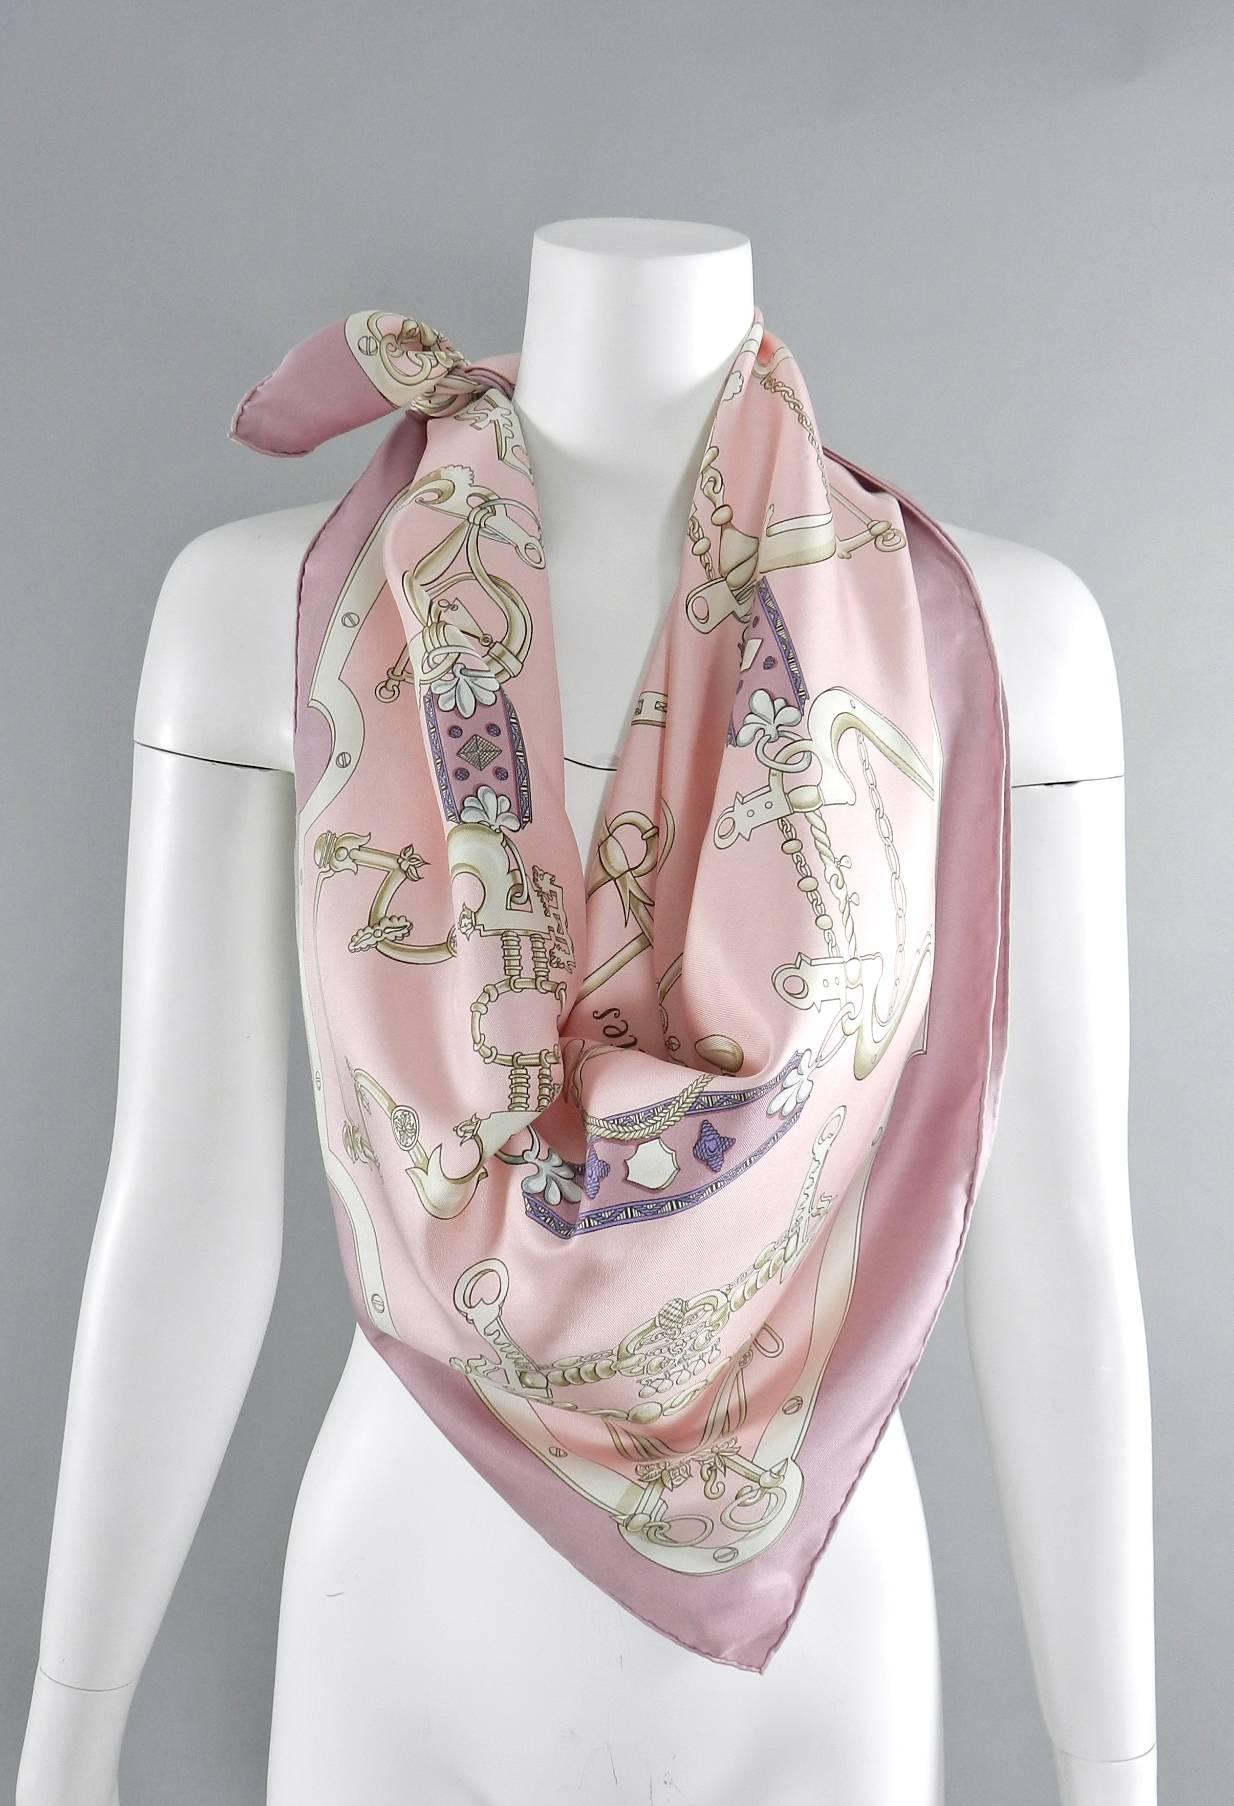 Hermes silk twill 90cm scarf - Mors et Gourmettes in box.  Artist H. d'Origny.  Primary colors are ivory, white, light pink, and darker quartz pink.  Excellent condition. 

We ship worldwide.